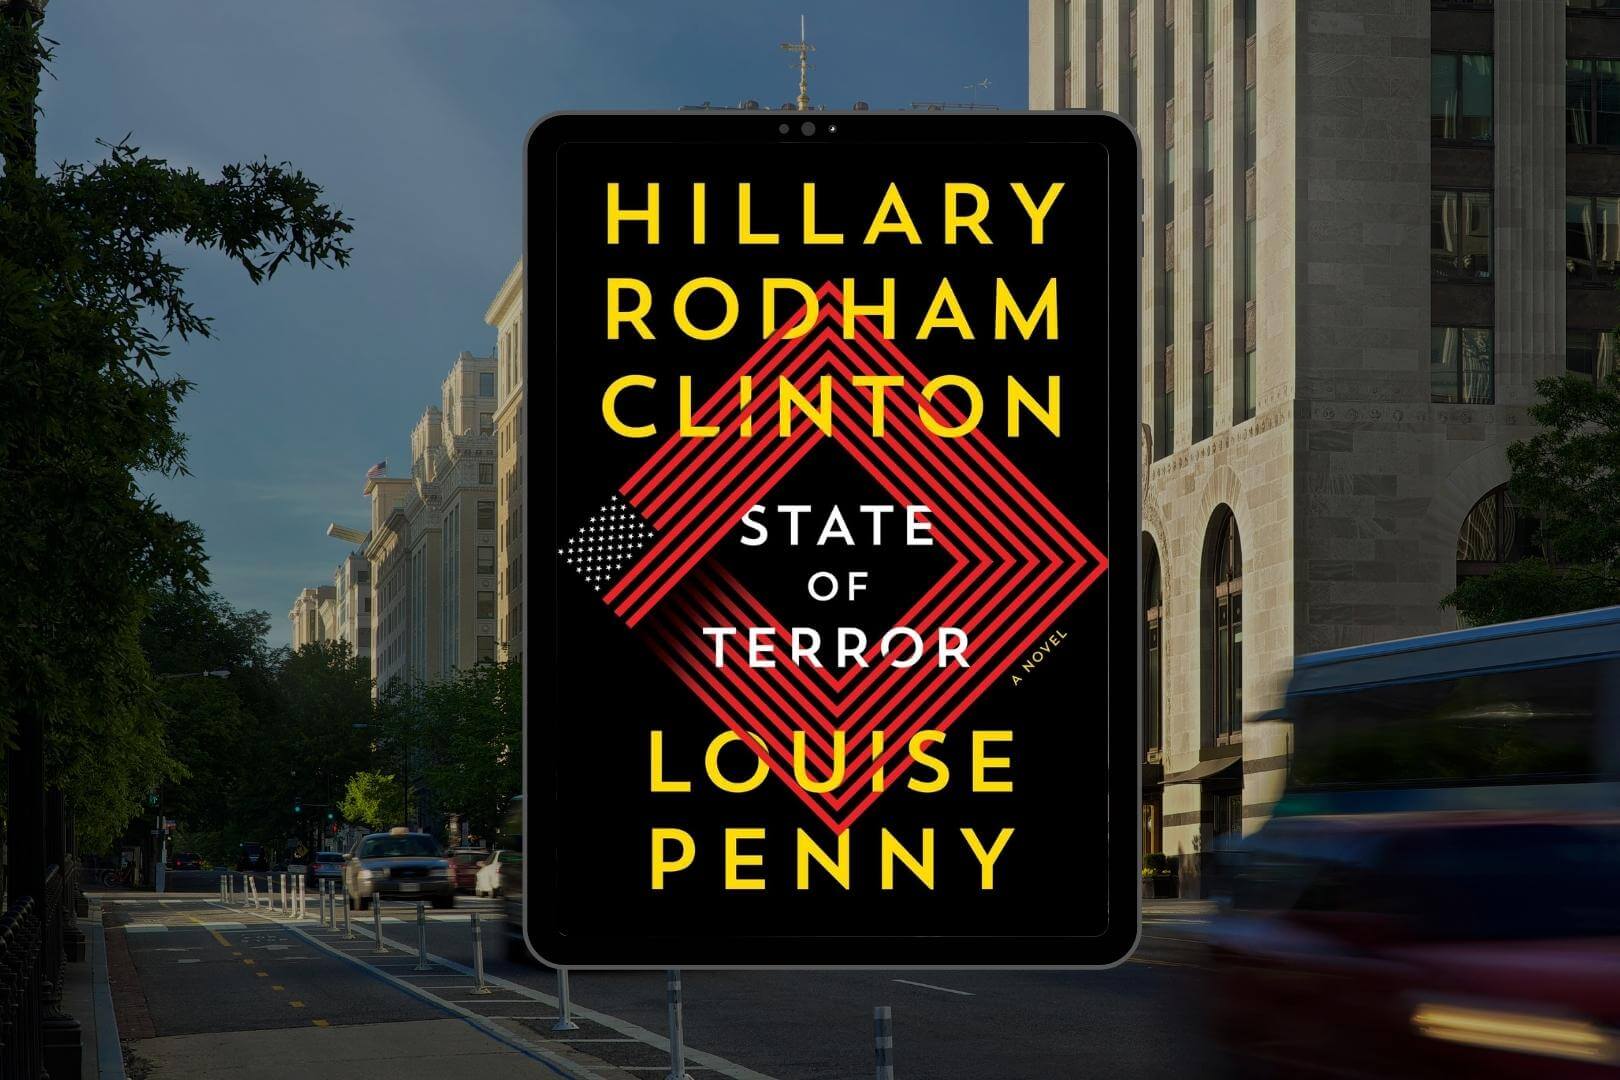 Review: State of Terror by Hillary Rodham Clinton and Louise Penny